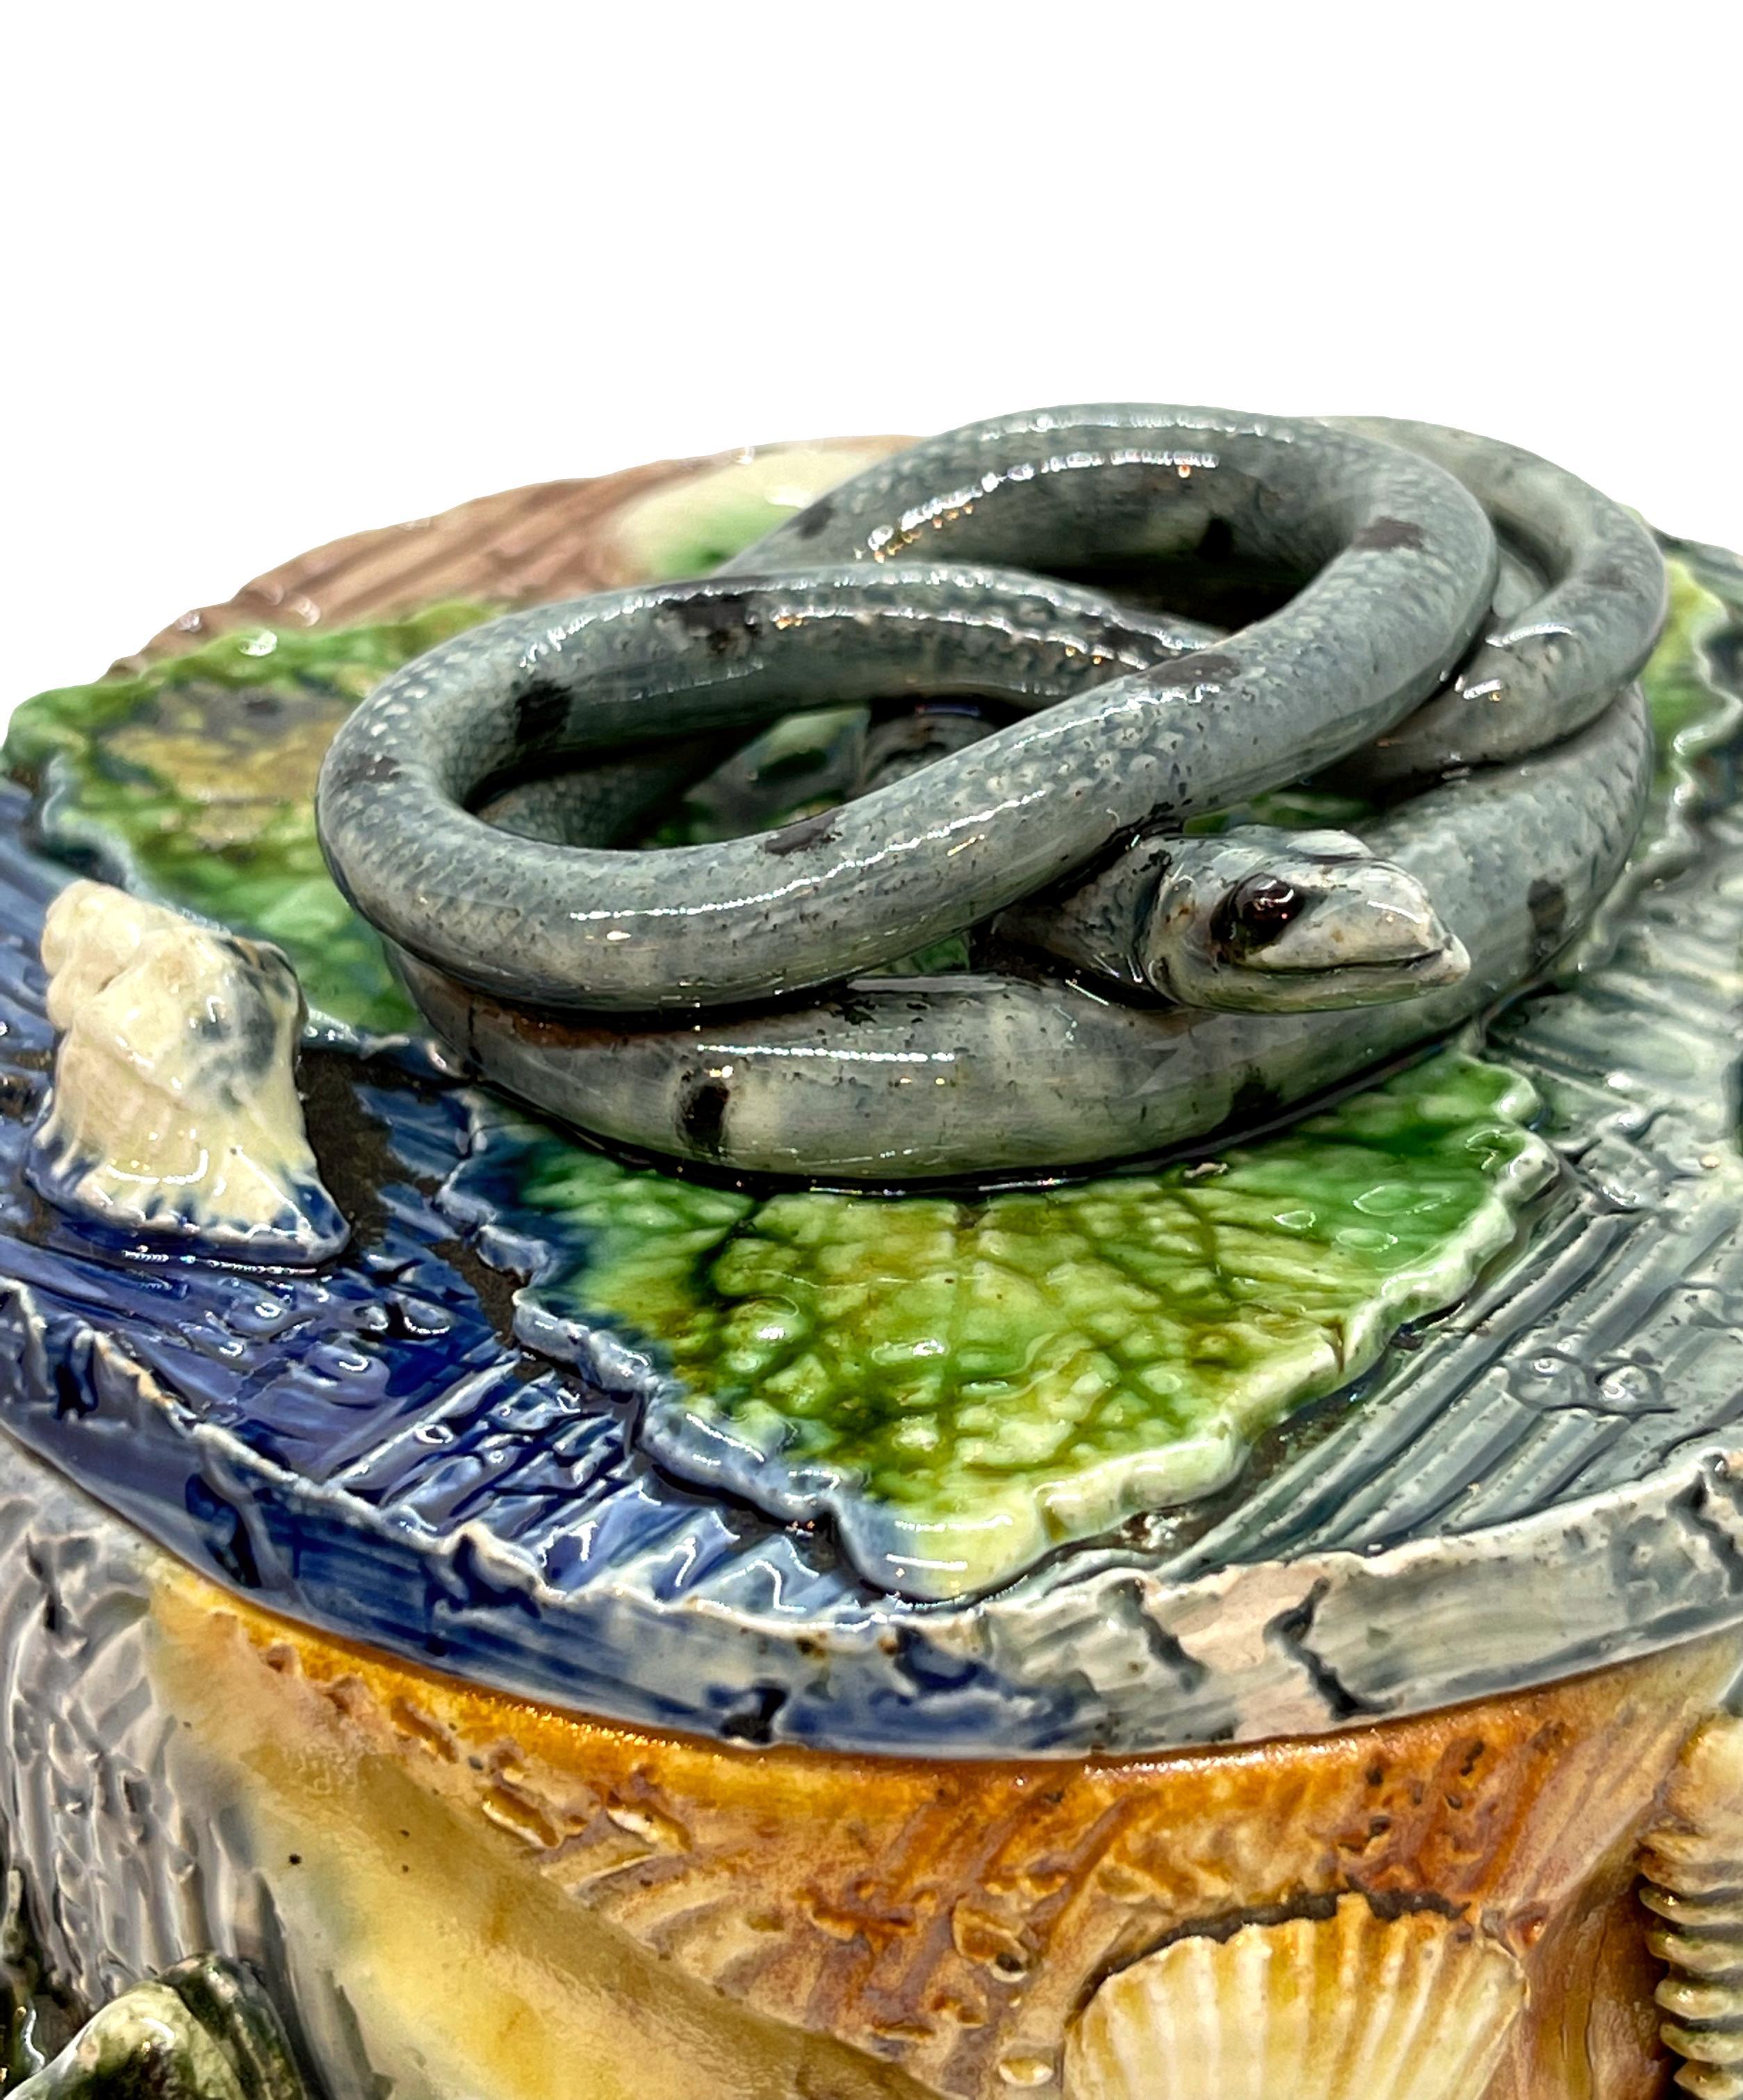 Thomas Sergent Majolica Palissy Ware Humidor with Coiled Snake on Lid, ca, 1880  1